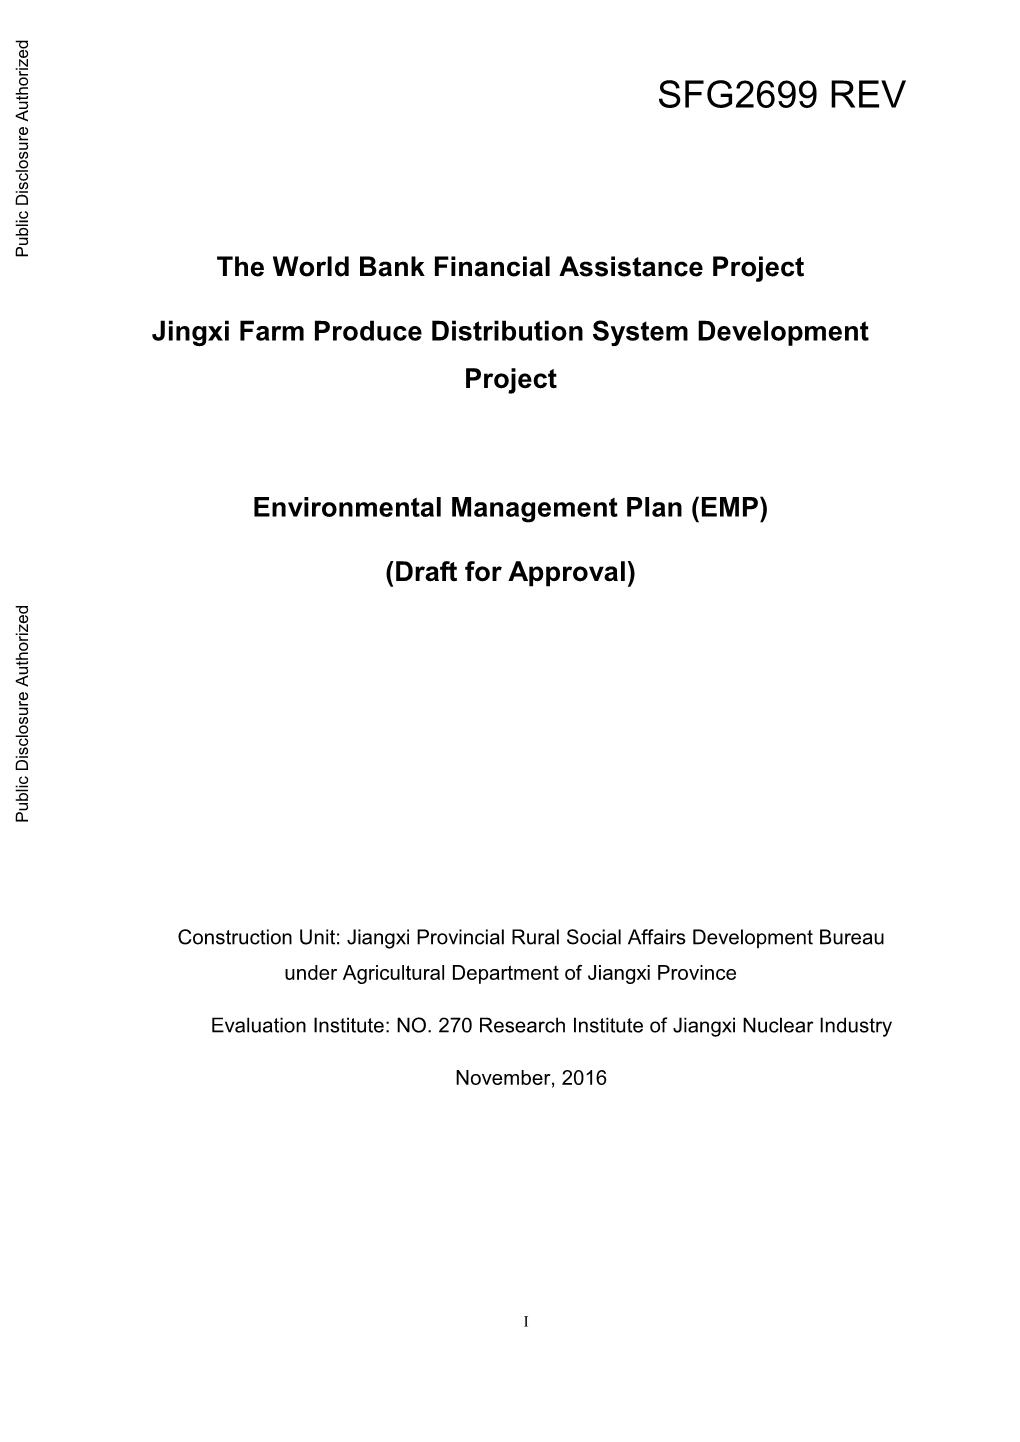 The World Bank Financial Assistance Project